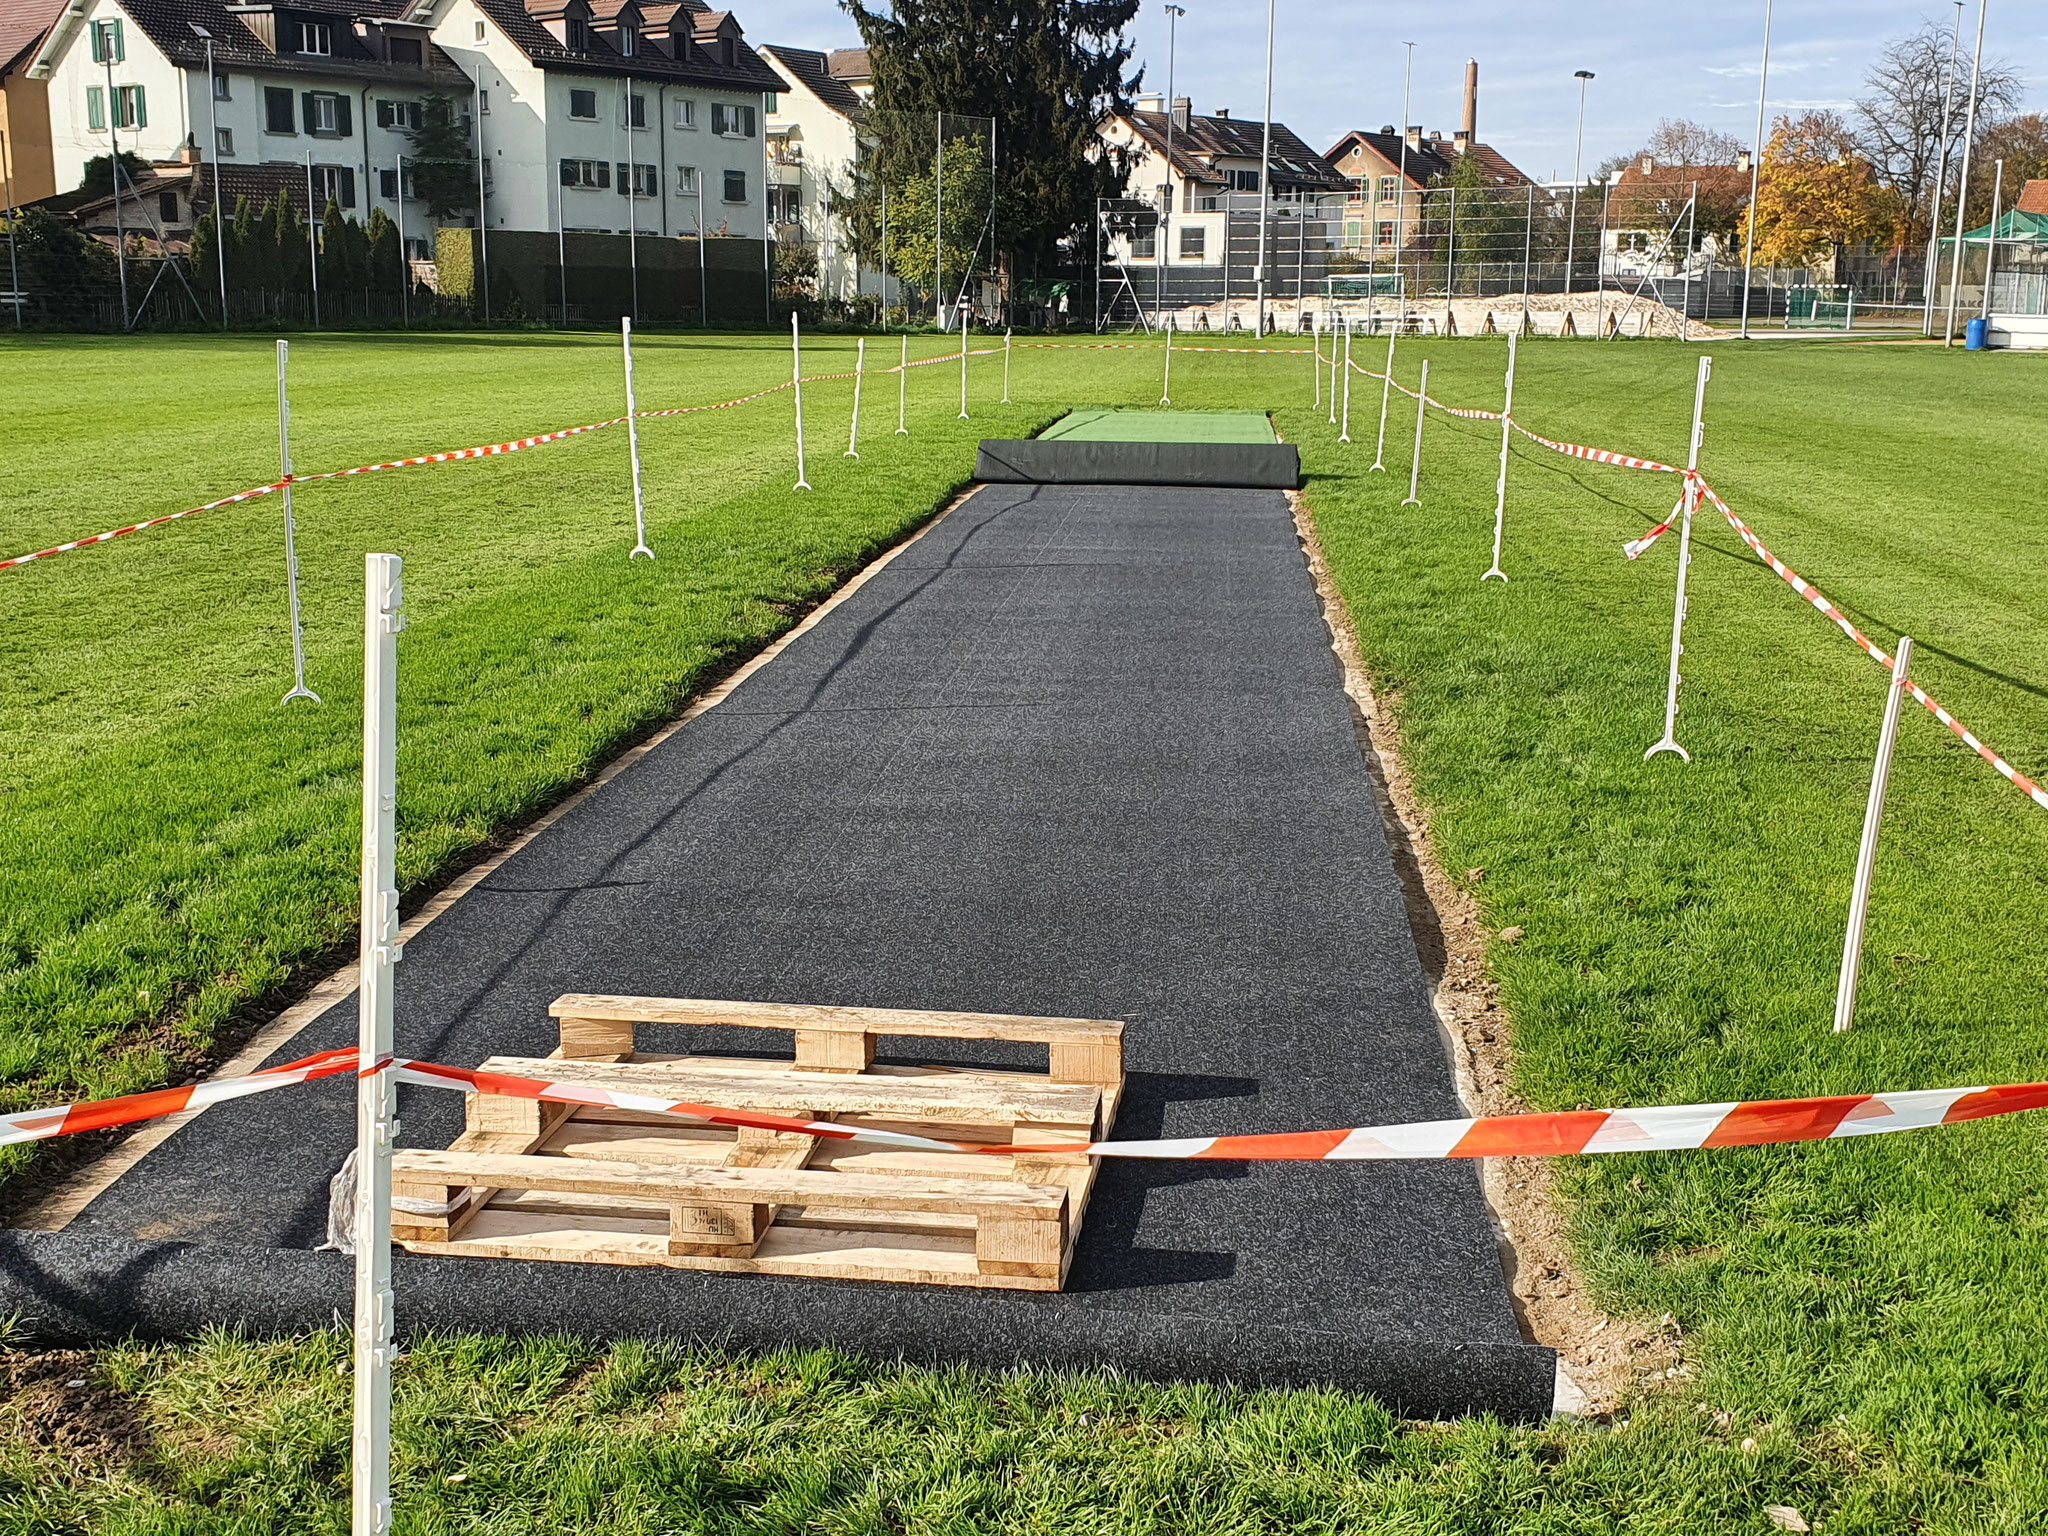 After resurfacing the concrete slab, the shockpad underlay was glued and nailed into place.